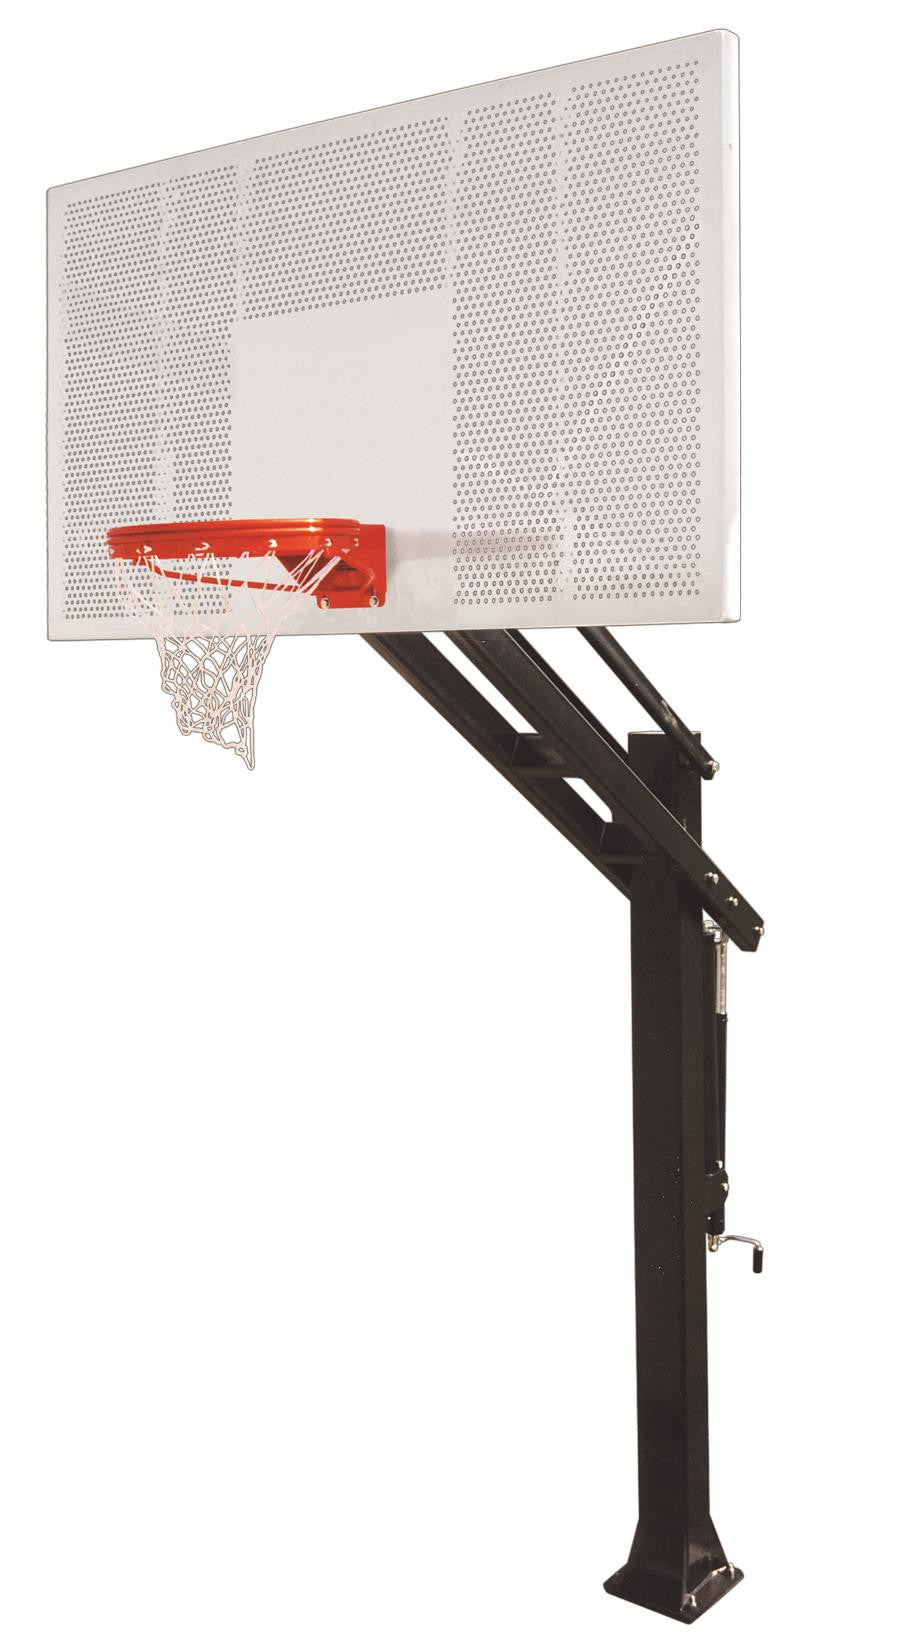 First Team Titan Intensity In Ground Outdoor Adjustable Basketball Hoop 72 inch Perforated Aluminum